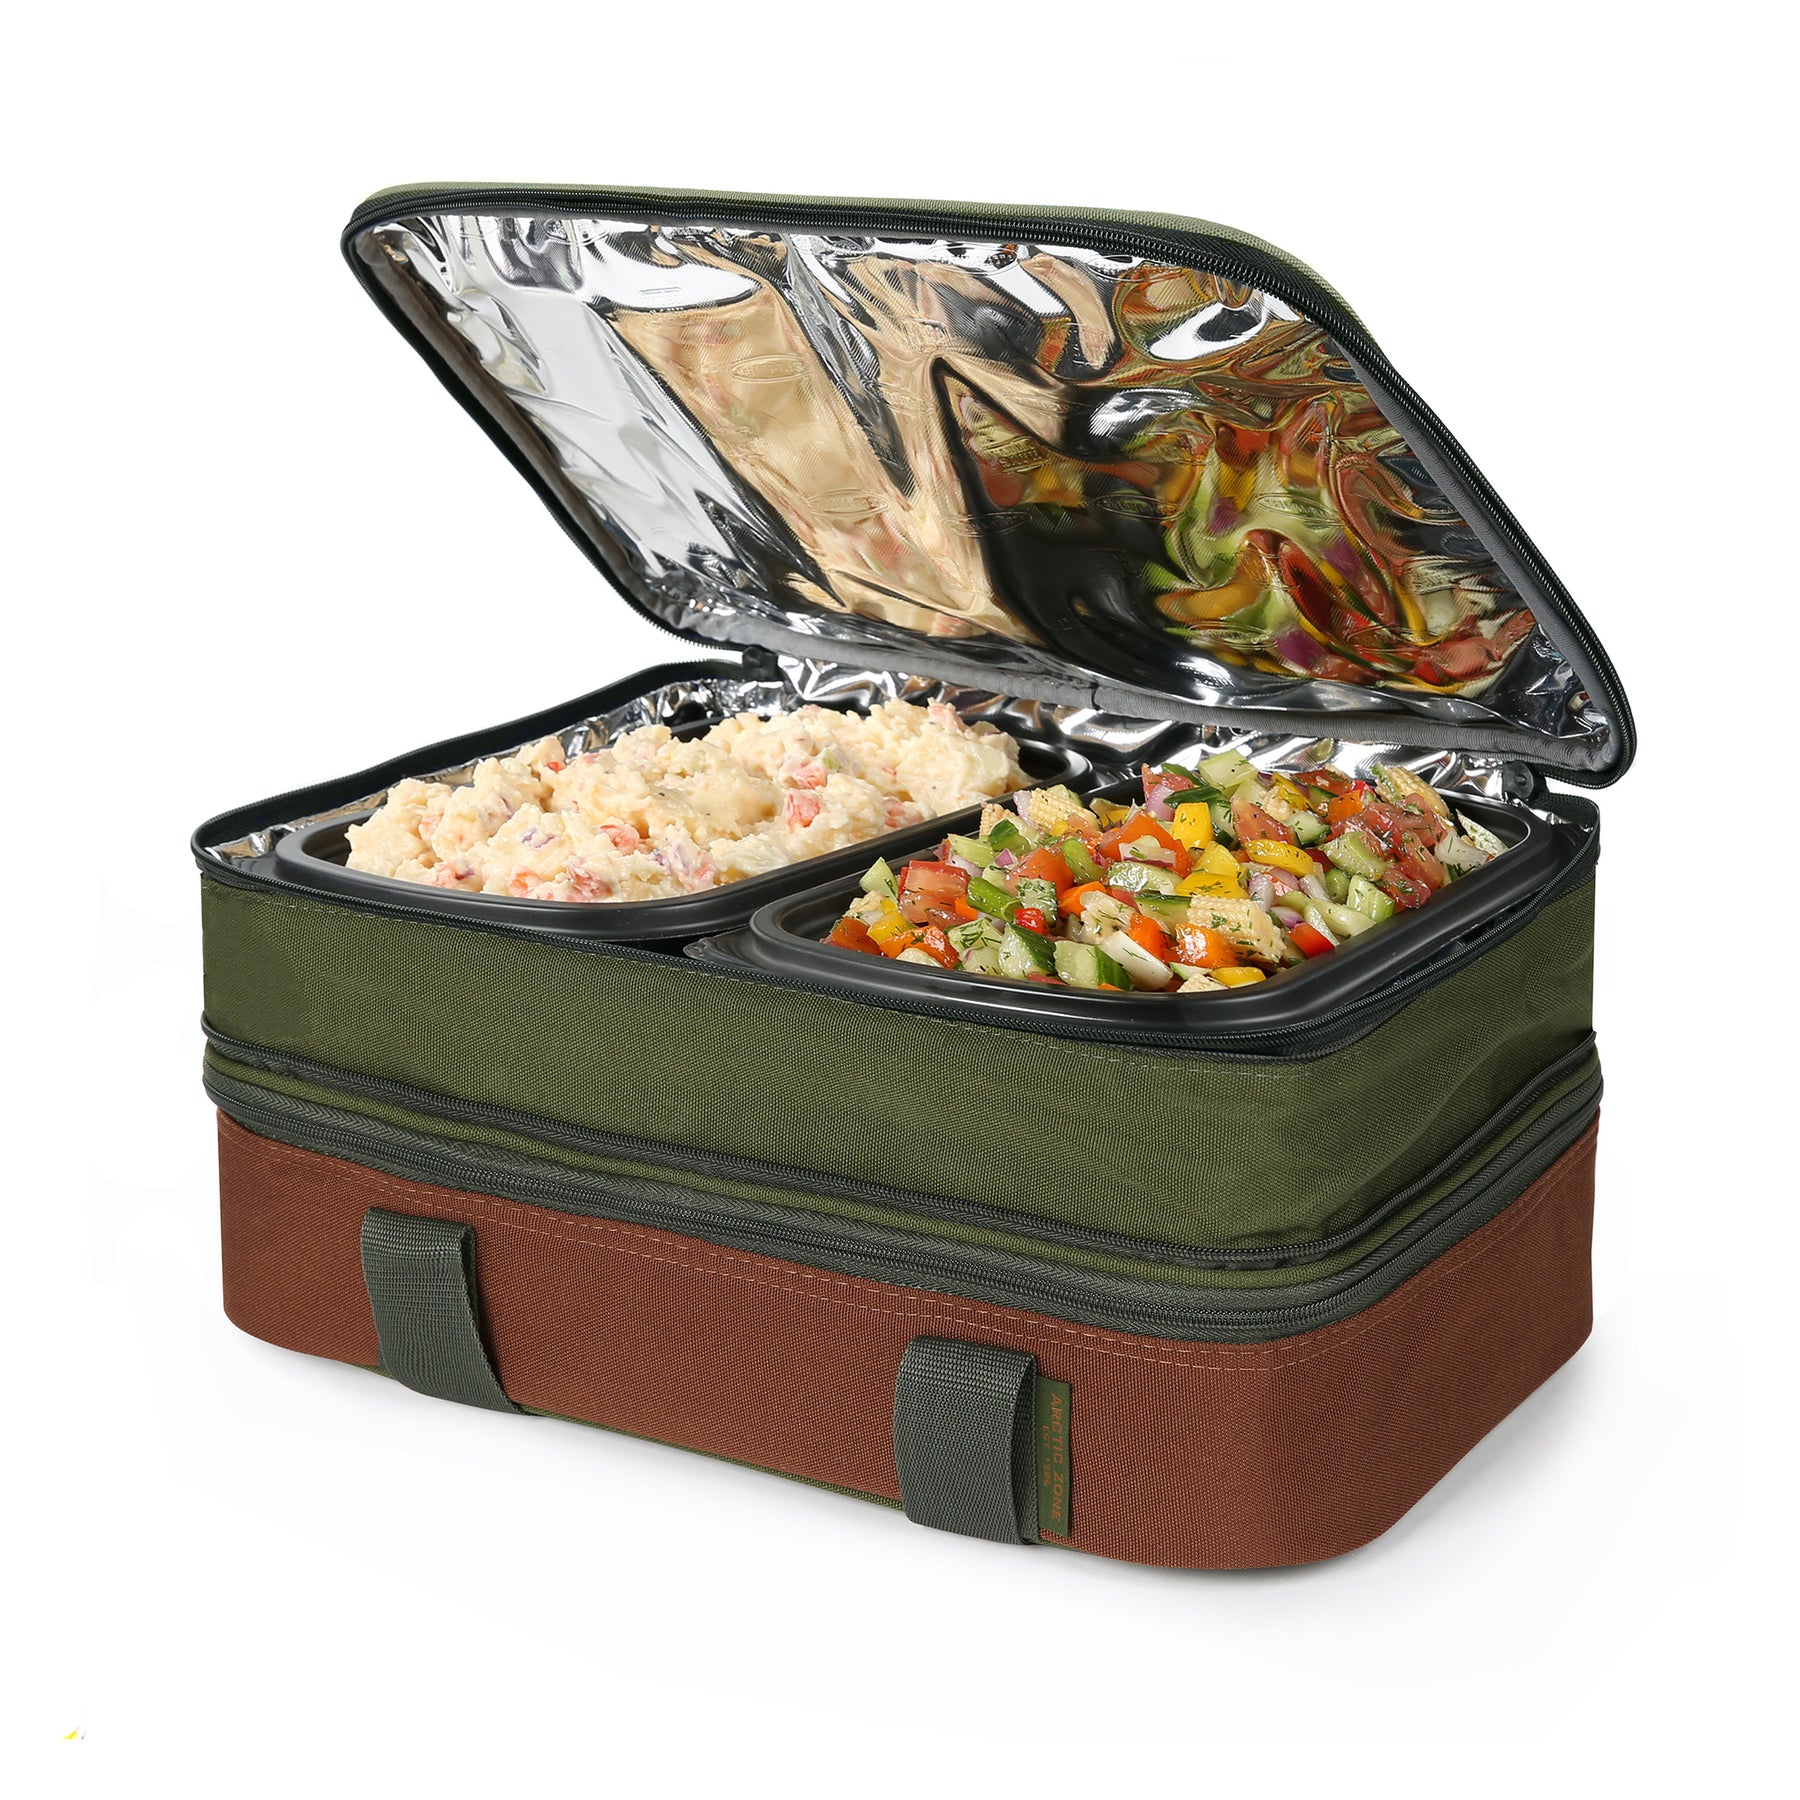 Arctic Zone 2007IL15284B Expandable Thermal Insulated Food Carrier, Navy